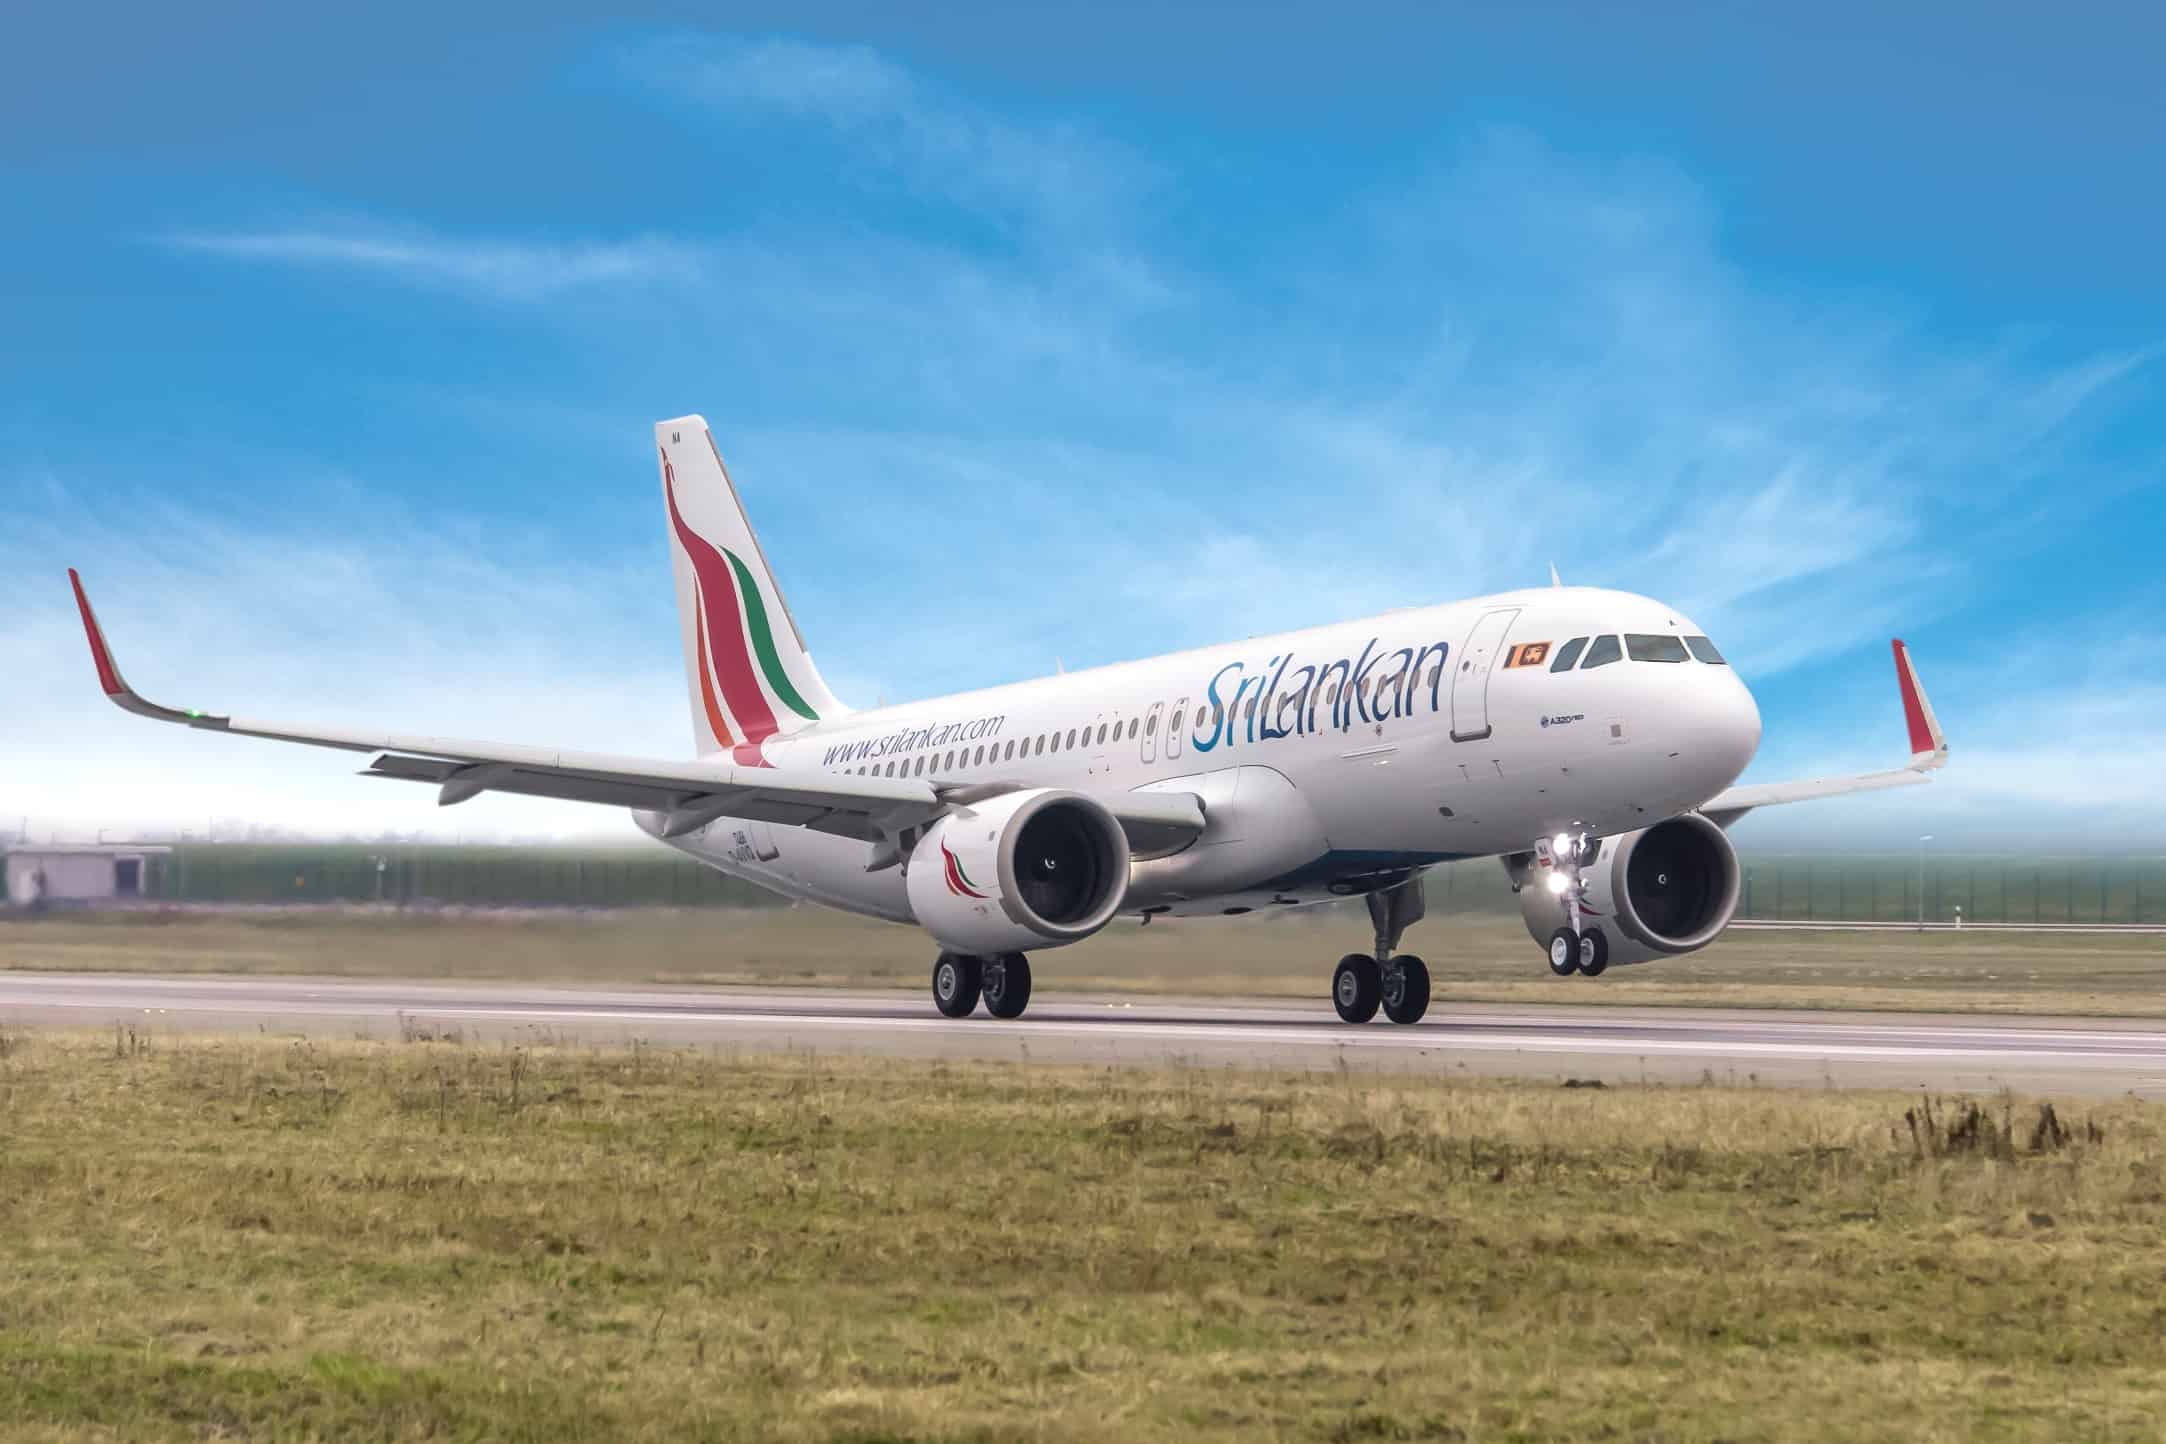 Srilankan Airlines aircraft taking off from a runway